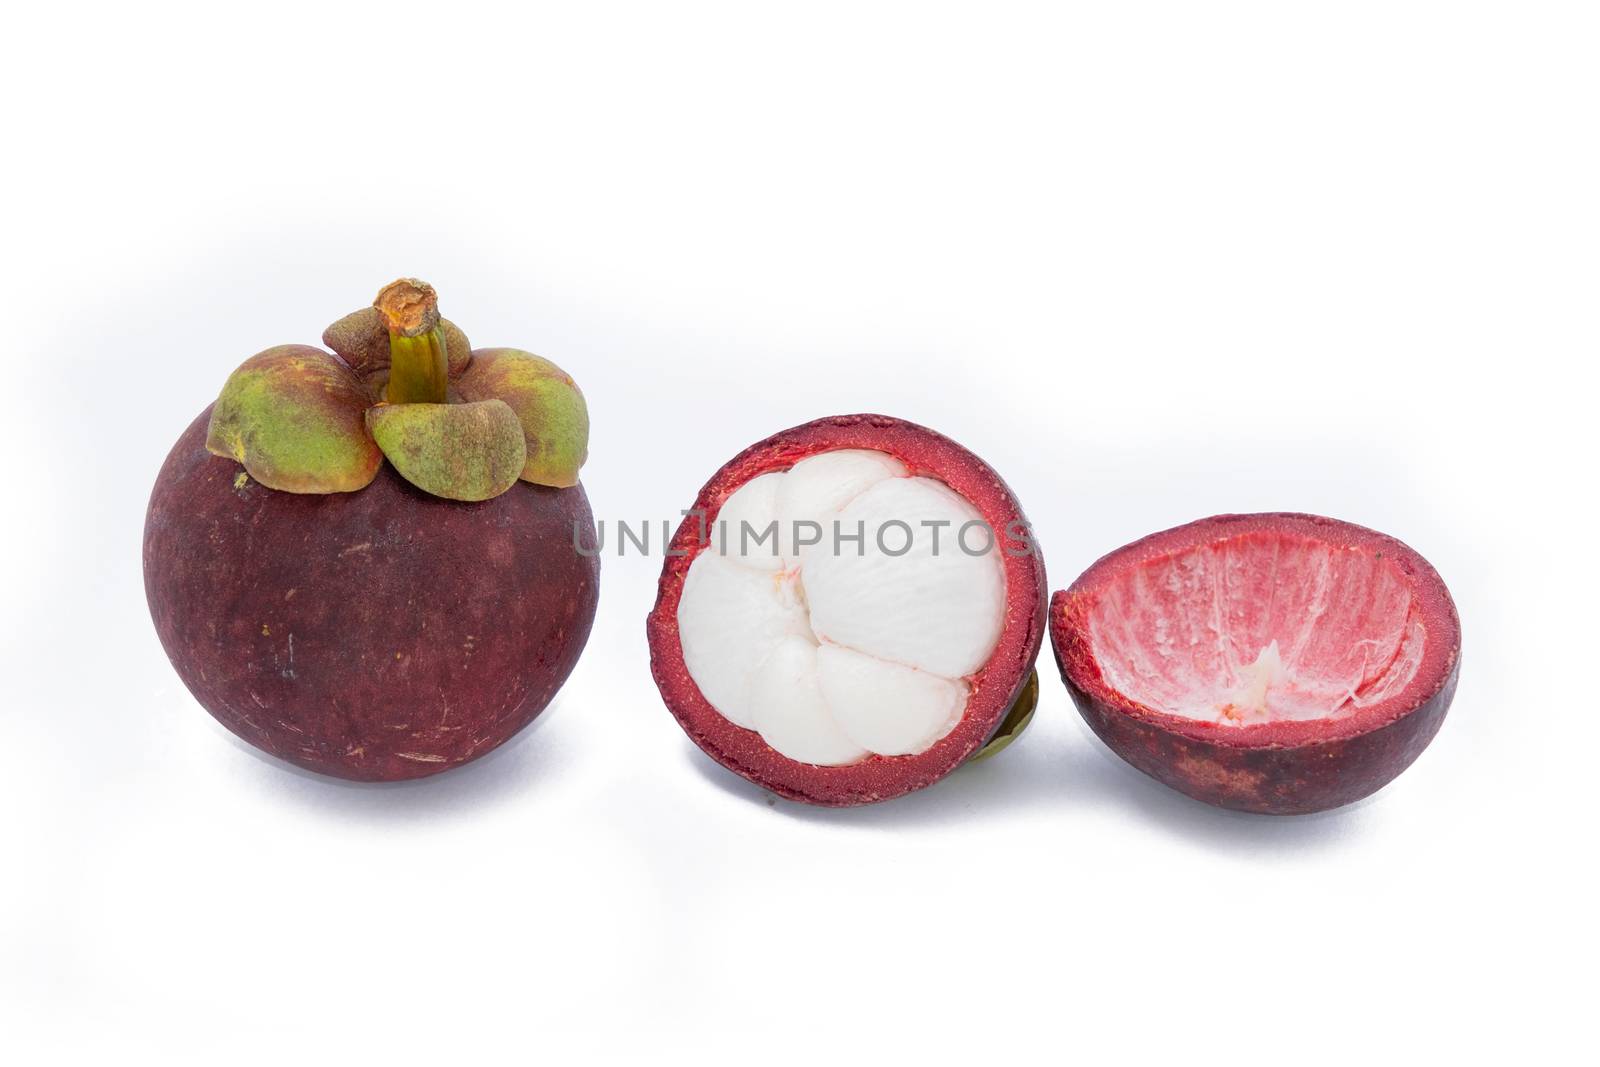 The Mangosteen and cross section showing the thick purple skin and white flesh of the queen of fruits, Delicious mangosteen fruit arranged on a bowl, Mangosteen flesh, closeup. Mangosteen.